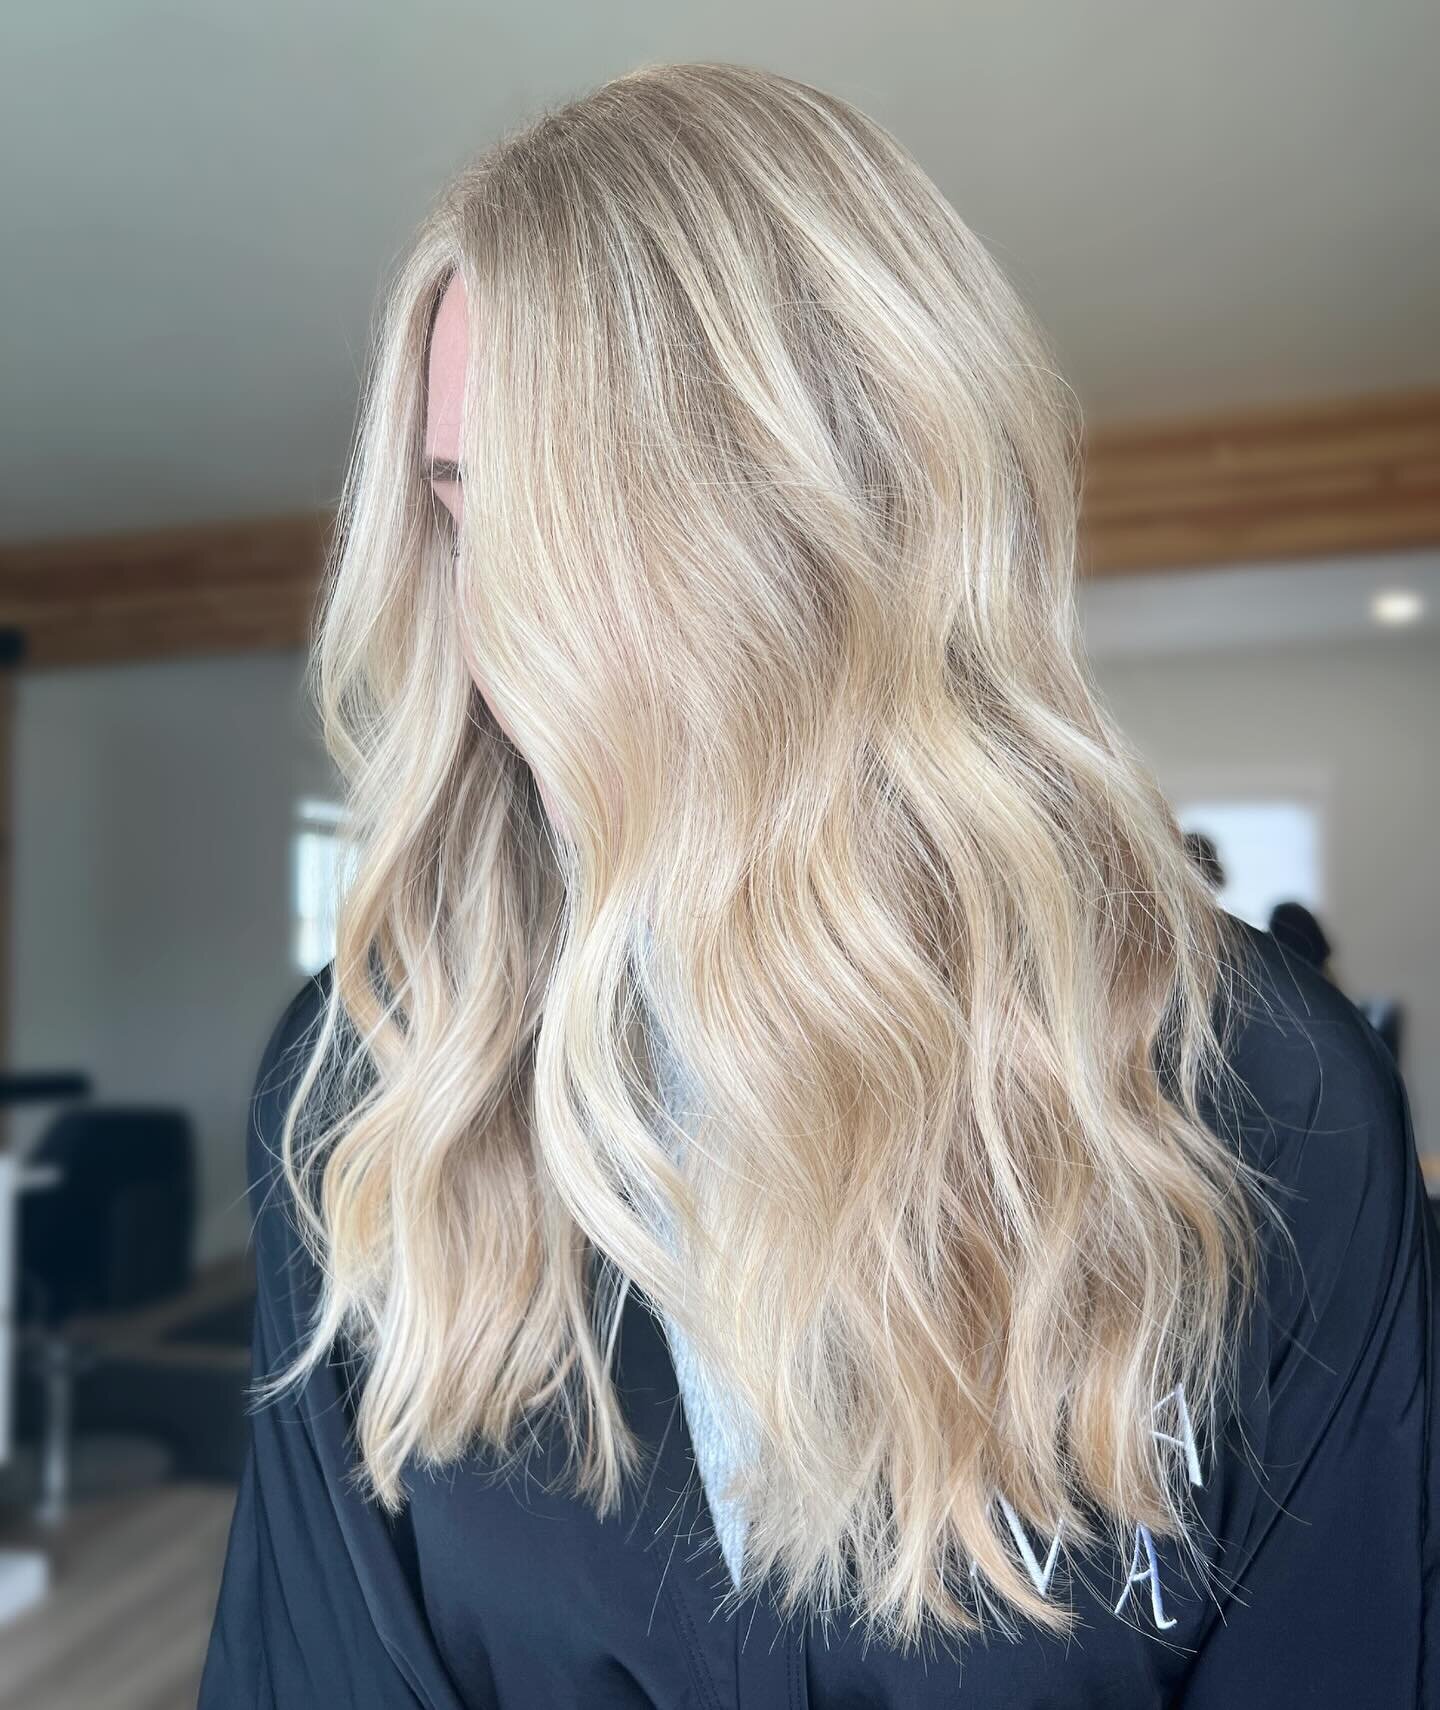 Let&rsquo;s warm things up with Mana&rsquo;s Signature Beach Blonde ✨

Depth and dimension is left intentionally with pops of brightness to give you that bright blonde you crave without the crazy upkeep and harsh grow out. It&rsquo;s what we do best!